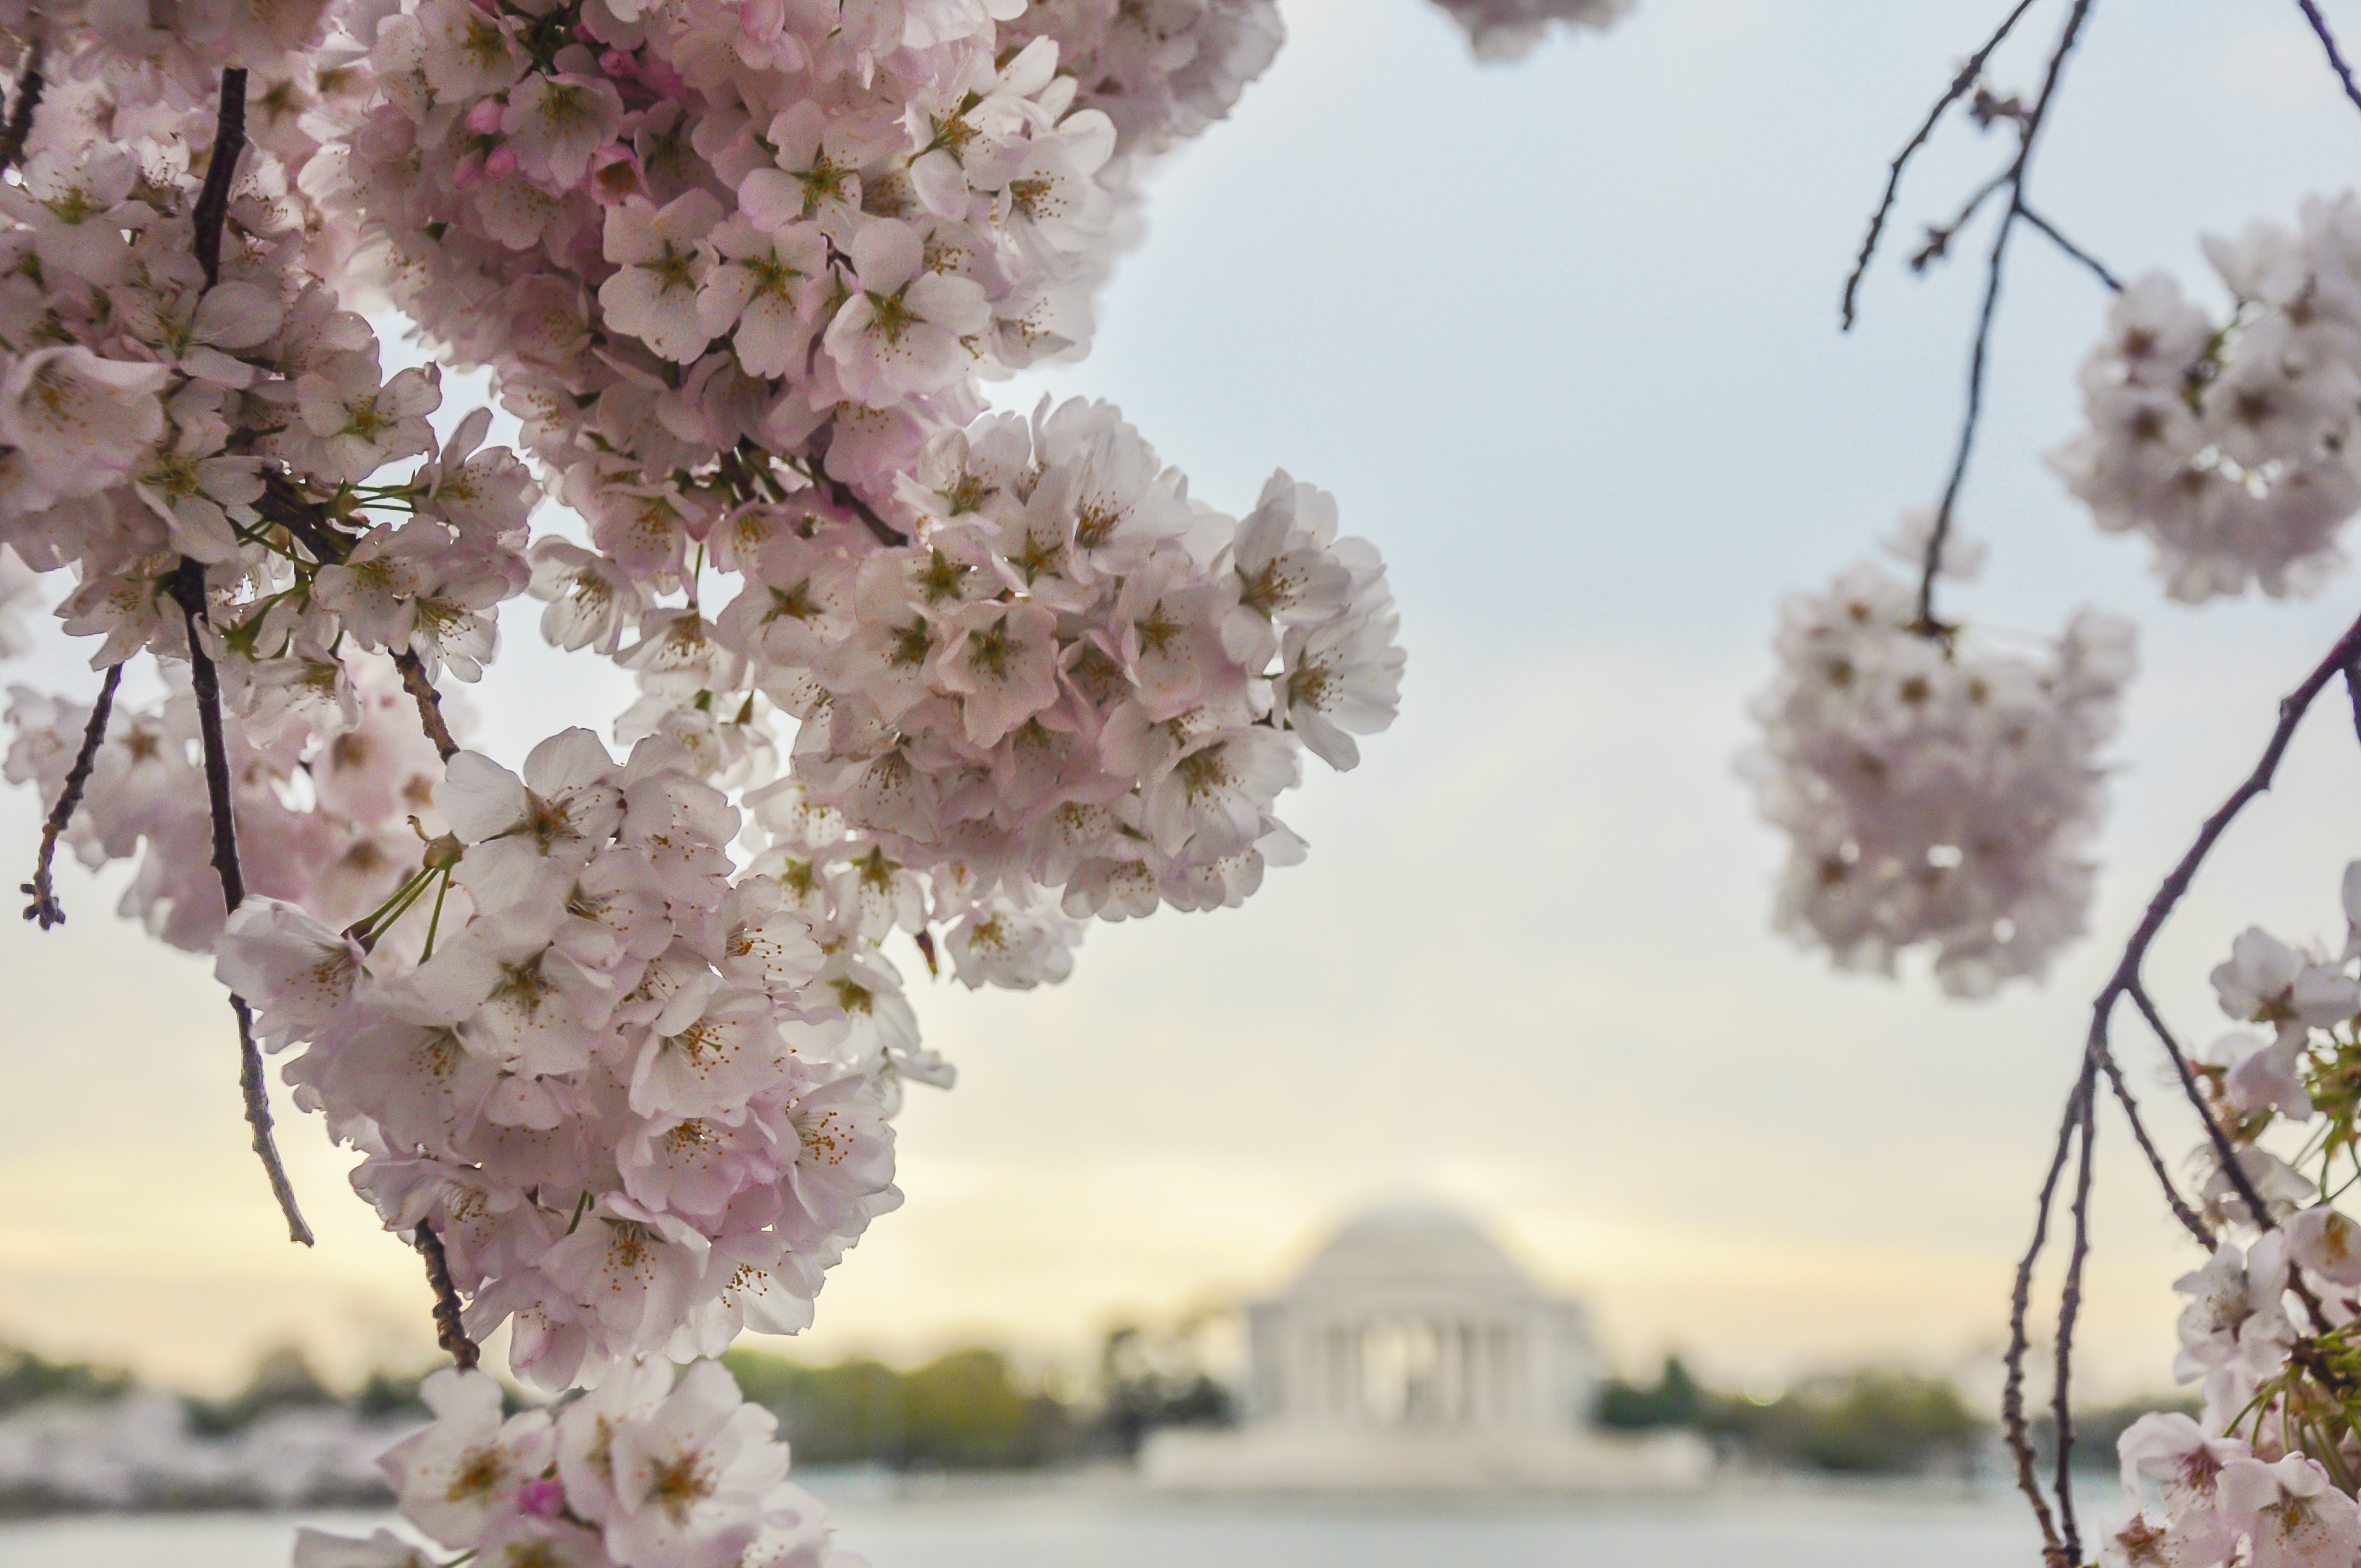 Cherry Blossom Tour | Where to See Cherry Blossoms in D.C.]